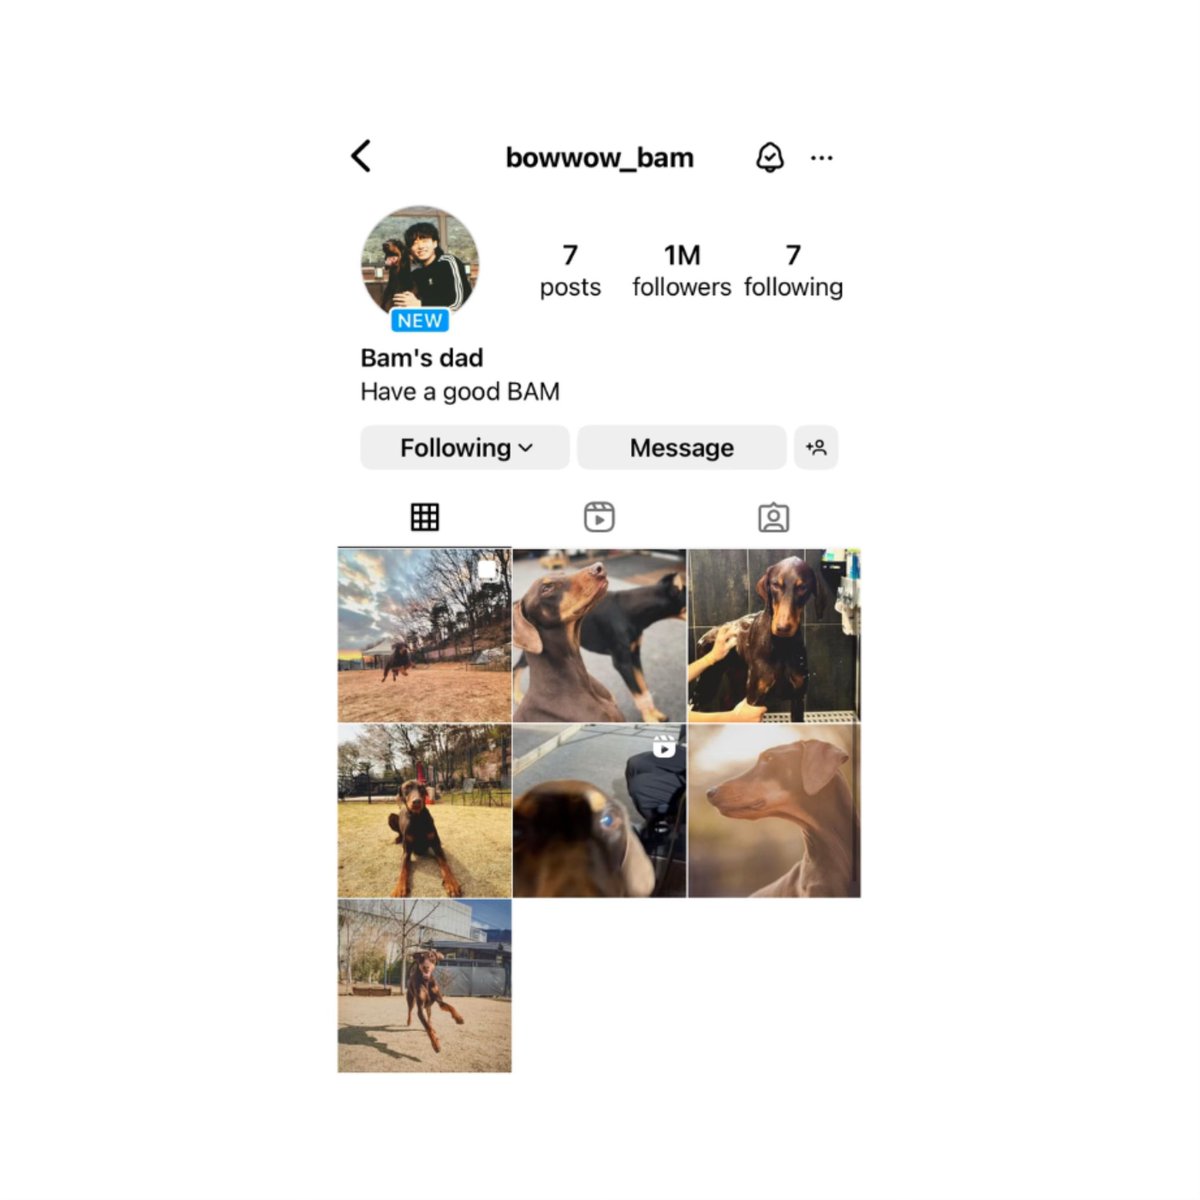 Jeon Bam now officially holds the record for the fastest pet account to reach 1 million followers on Instagram (14 hours).